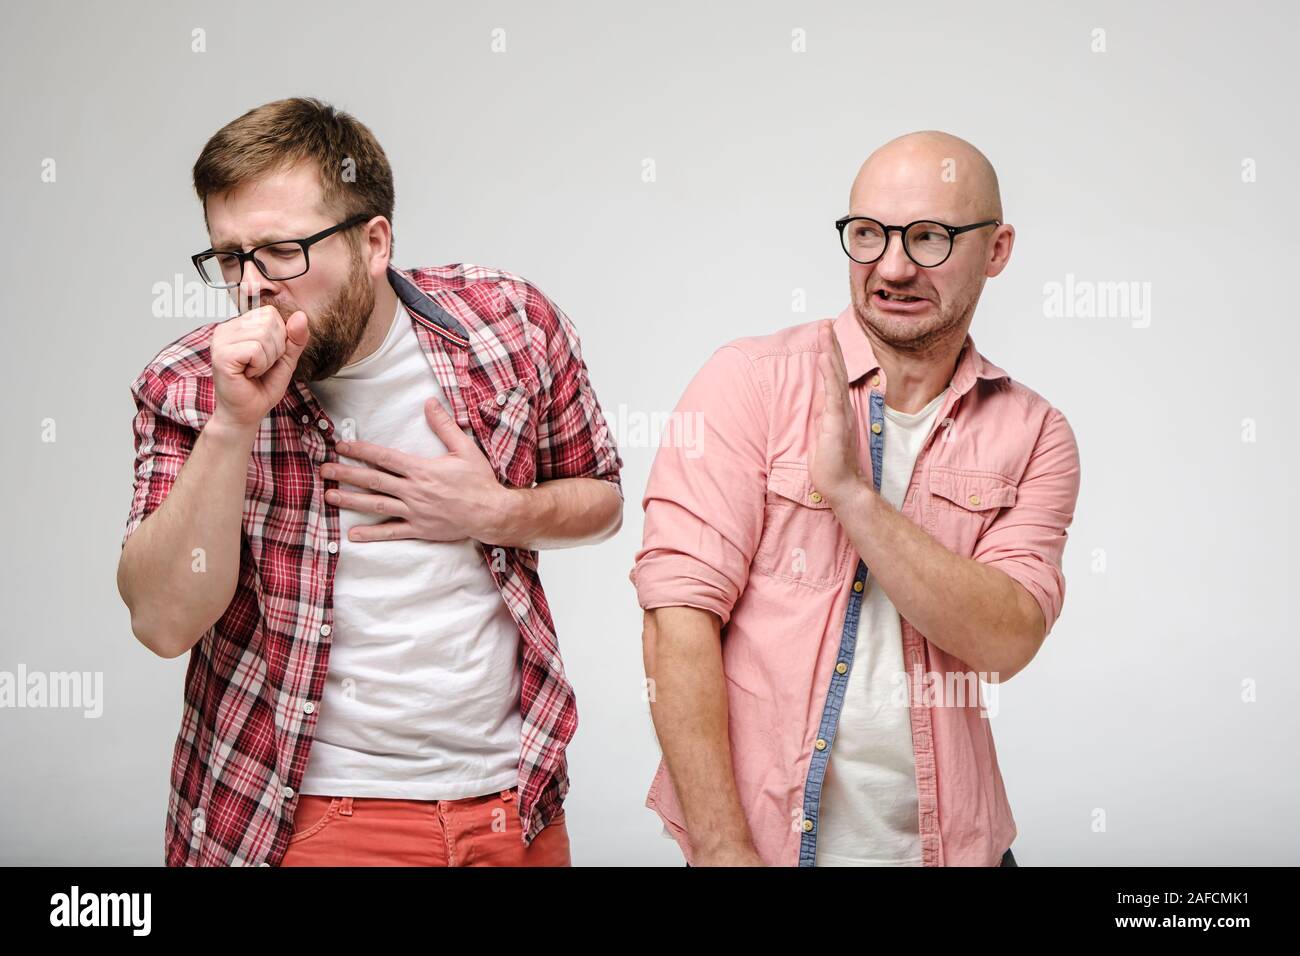 One man coughs, closing mouth with hand, and other man makes a gesture of protection, putting palm forward and looking in disgust. Stock Photo